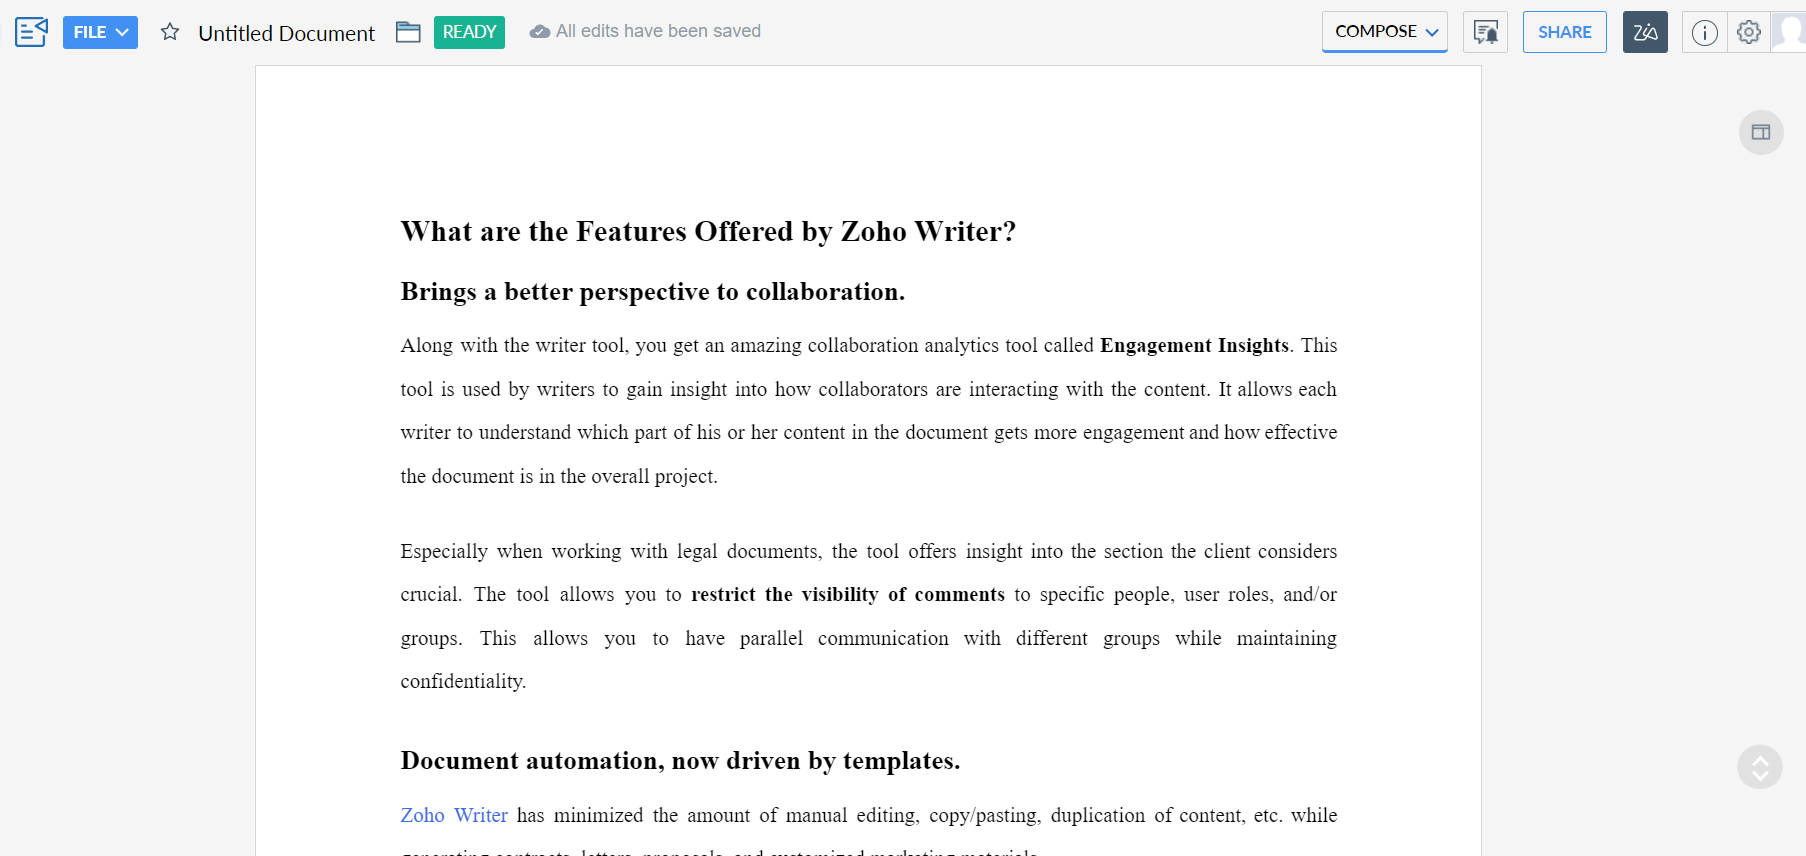 What are the Features Offered by Zoho Writer? Brings a better perspective to collaboration. Along with the writer tool, you get an amazing collaboration analytics tool called Engagement Insights. This tool is used by writers to gain insight into how collaborators are interacting with the content. It allows each writer to understand which part of his or her content in the document gets more engagement and how effective the document is in the overall project. Especially when working with legal documents, the tool offers insight into the section the client considers crucial. The tool allows you to restrict the visibility of comments to specific people, user roles, and/or groups. This allows you to have parallel communication with different groups while maintaining confidentiality. Document automation, now driven by templates. Zoho Writer has minimized the amount of manual editing, copy/pasting, duplication of content, etc. while generating contracts, letters, proposals, and customized marketing materials. A new template, Prepare Template, flow allows you to configure a document for workflow automation. It also can be connected to data sources like Zoho CRM. Here are some template functions you can use: Merge templates: This allows the user to get data from spreadsheets or a CSV file. Form-driven templates: Documents can be generated as users submit data through a Zoho form. Sign templates: You can send documents for signing and approval. Fillable templates: You can create documents others can fill and submit. Easier ways to organize and edit content. Zoho Writer makes mundane and repetitive tasks easier. You can move sections of the content by dragging and dropping in the Document Navigator panel. You can click on the heading and move it up and down. It is fun when you notice all the paragraphs under the heading can be moved. Another interesting thing you get through Writer is the Multi-page view, which allows users to edit multiple pages at a time. A great, cross-platform PDF Form alternative. Creating and distributing fillable documents takes a lot of time and effort. The writer makes this job easier. You’re offered a new form of fillable documents which easily works across operating systems, without additional installations. This smoothly integrates with electronic signatures, email, and cloud storage services. This feature saves a lot of time for executives and HR. The employees can easily fill-out corporate forms and submit them back without the need to print the document or send attachments over email. Reducing formatting and customization headaches. For many, formatting is an alienating process. The writer offers you features that smooth the process of formatting. The only thing you need to do is extract the design from the existing document and apply it to your document in Writer with a few simple clicks. To maintain brand consistency, the tool also allows you to directly bring in fonts from your PC to the Writer. CloudQ is an authorized Zoho partner and can help your business implement these tools. To find out more, contact us. Your business deserves the best, and as an Authorized ZOHO Partner CloudQ can help you get there. Contact us for a consultation with our ZOHO experts today.